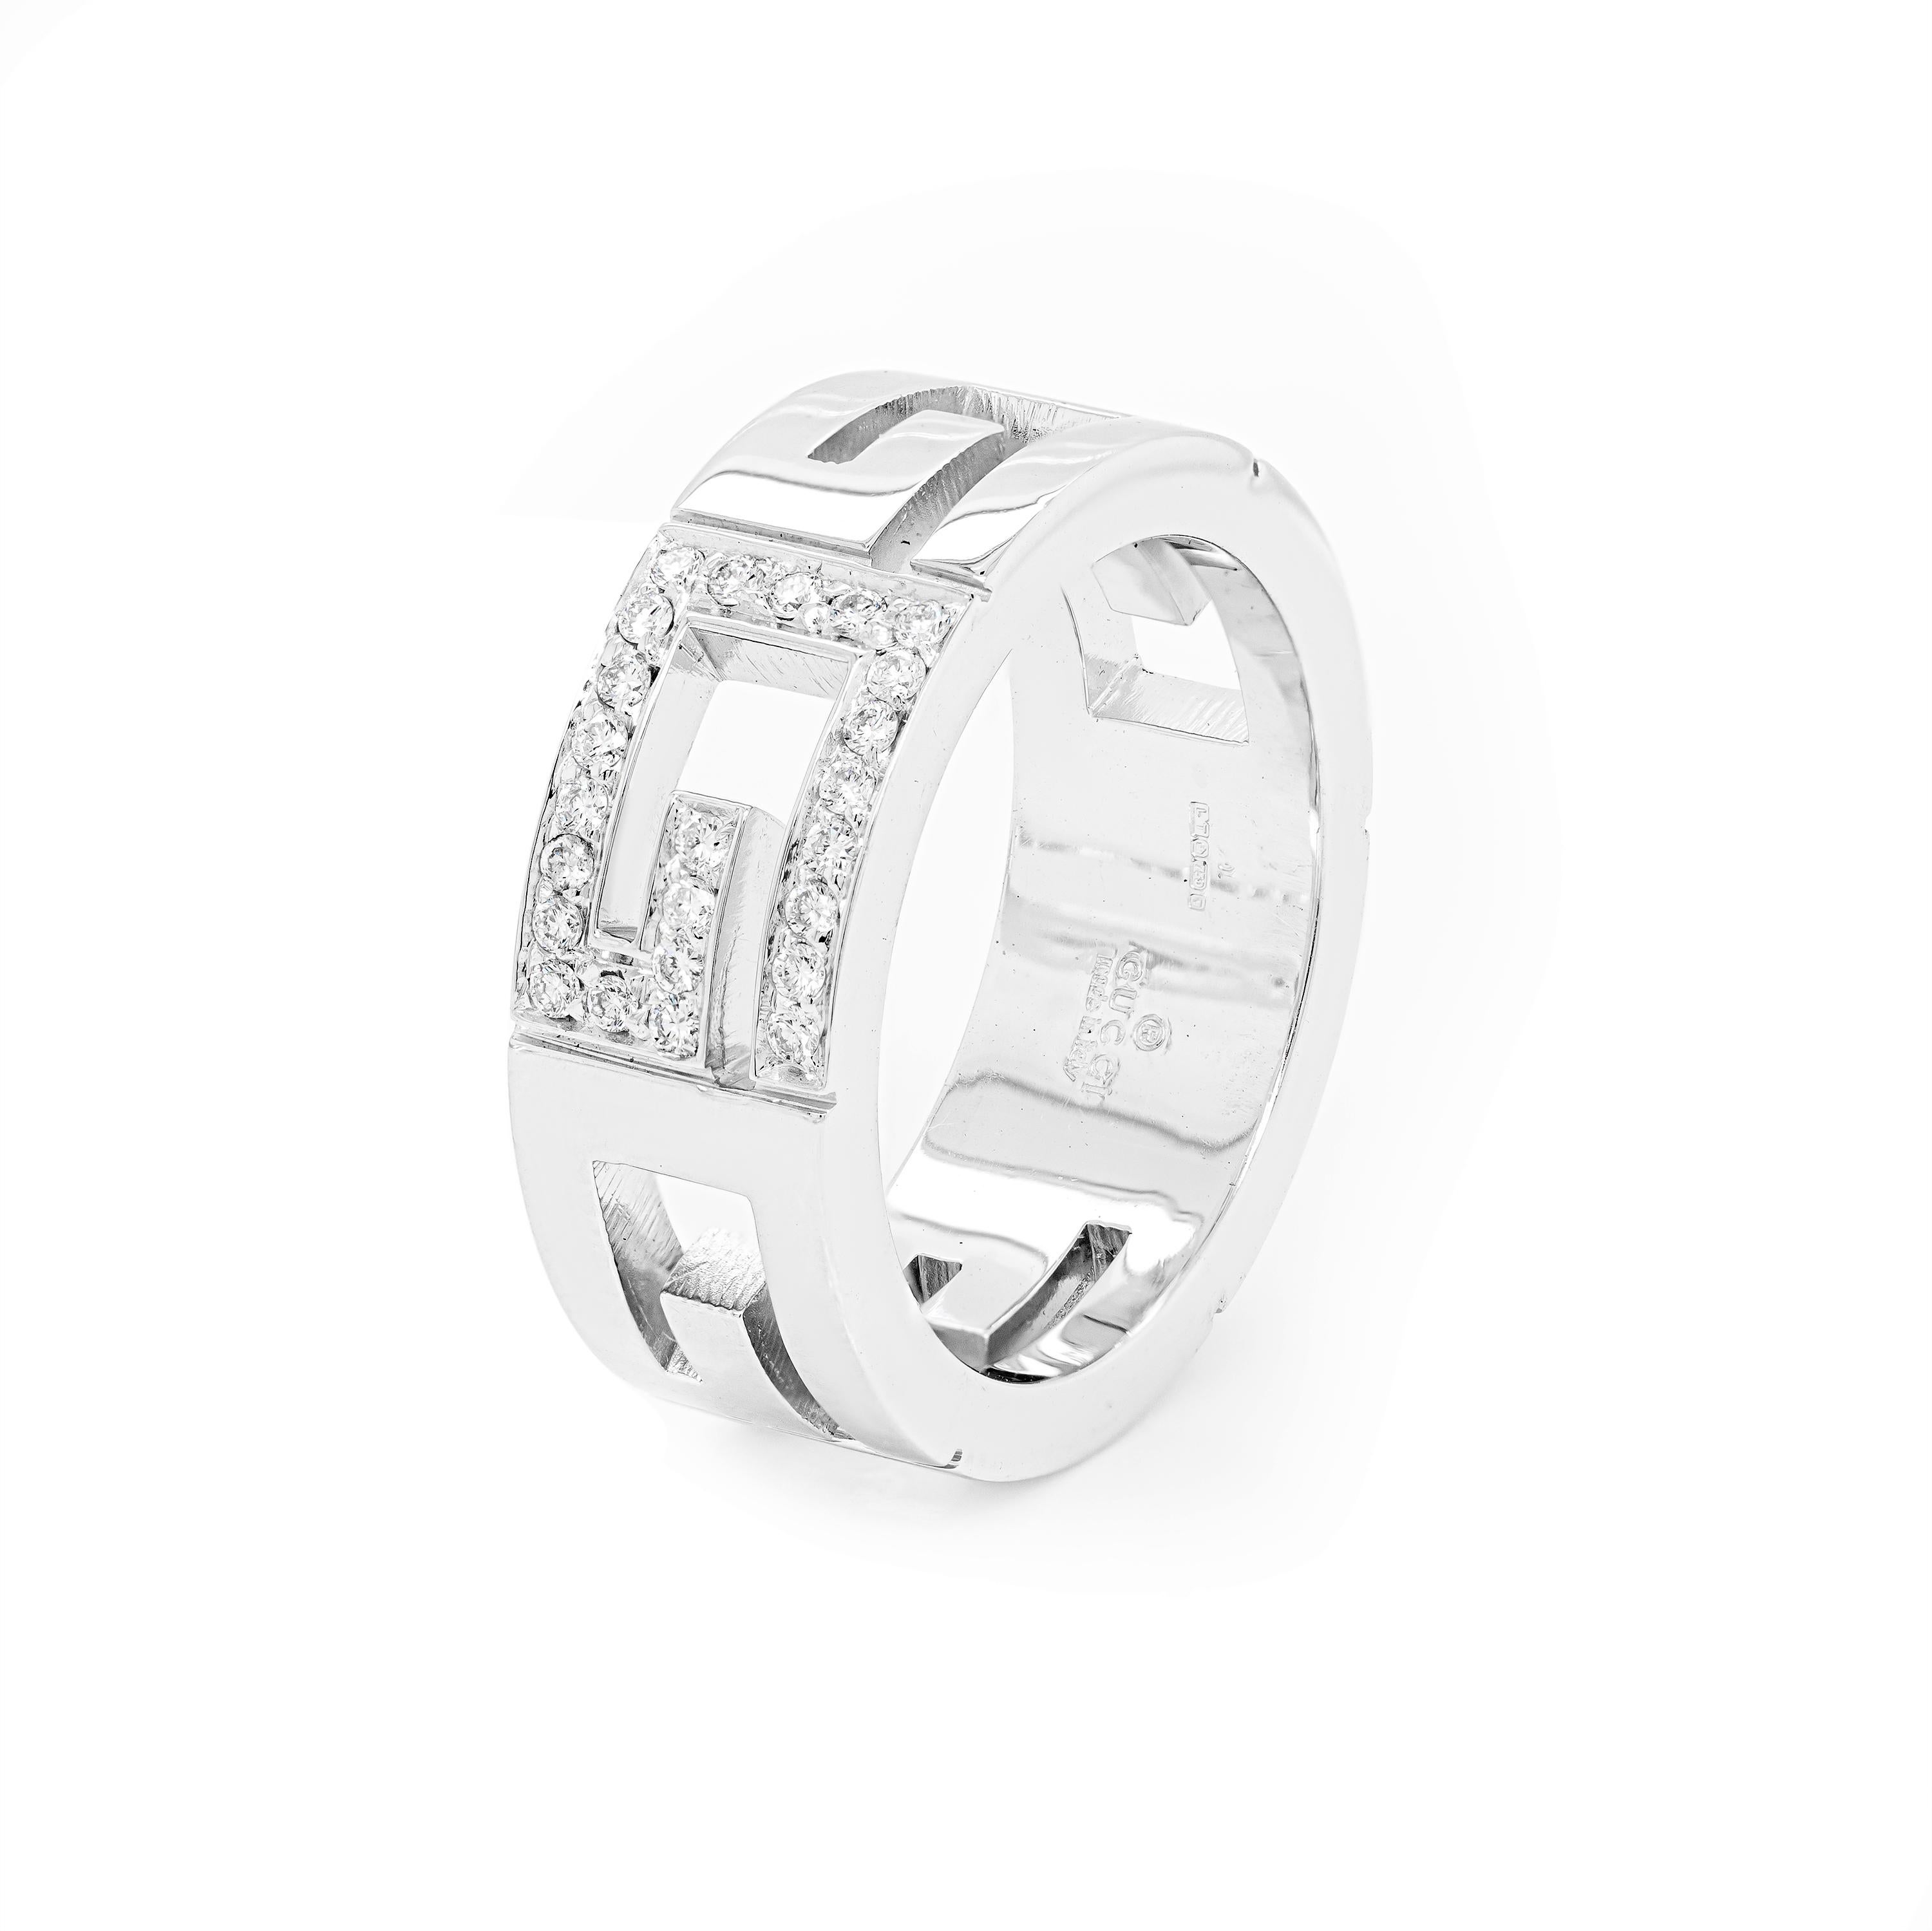 This beautiful ring from the luxury fashion house Gucci is beautifully designed as an open work piece showcasing the iconic 'G' logo cut-out multiple times throughout the 18 carat white gold band. The central 'G' is decorated with 24 high quality